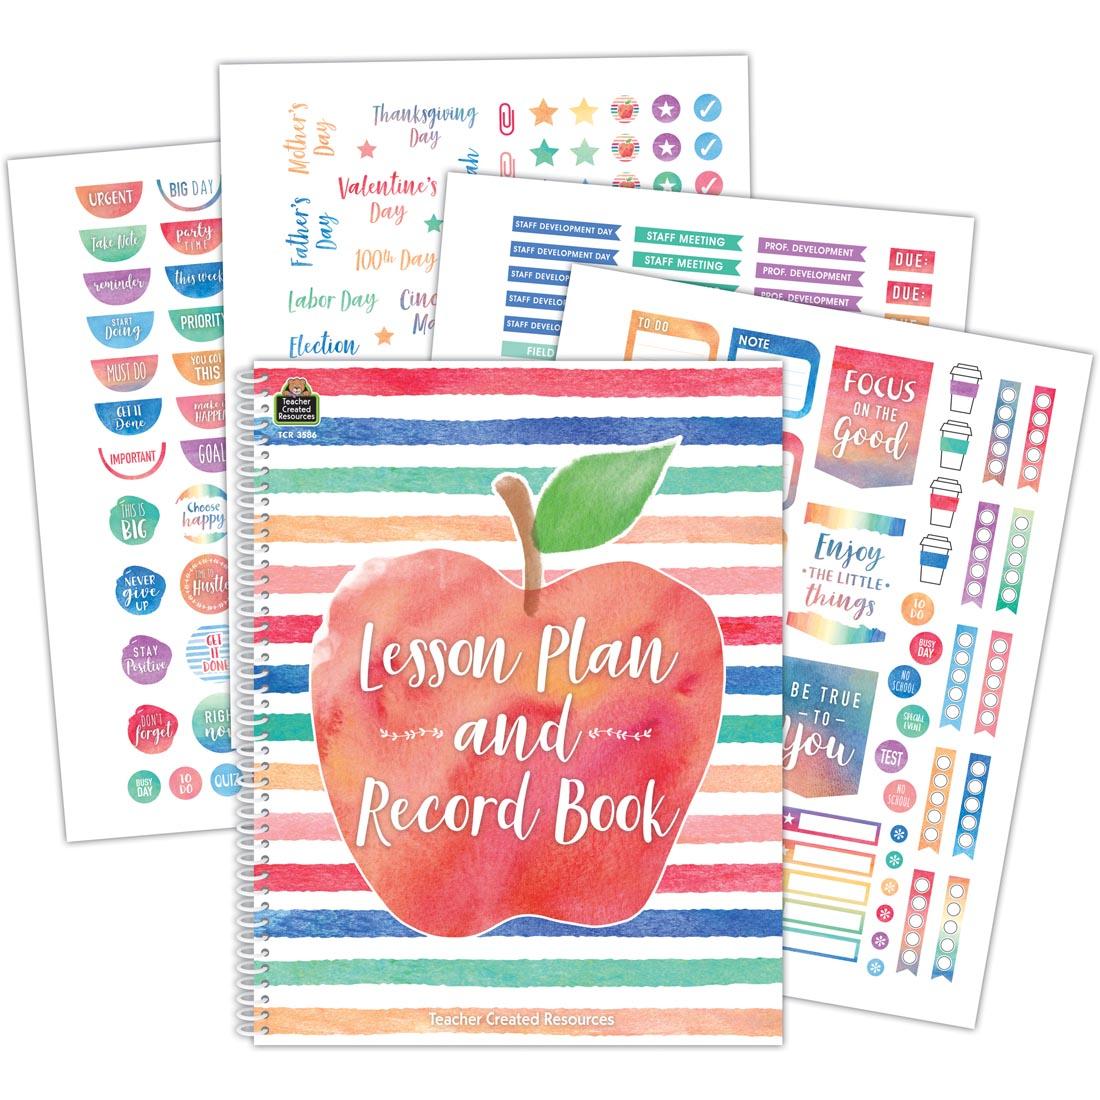 Watercolor Lesson Plan and Record Book plus sheets of planner stickers